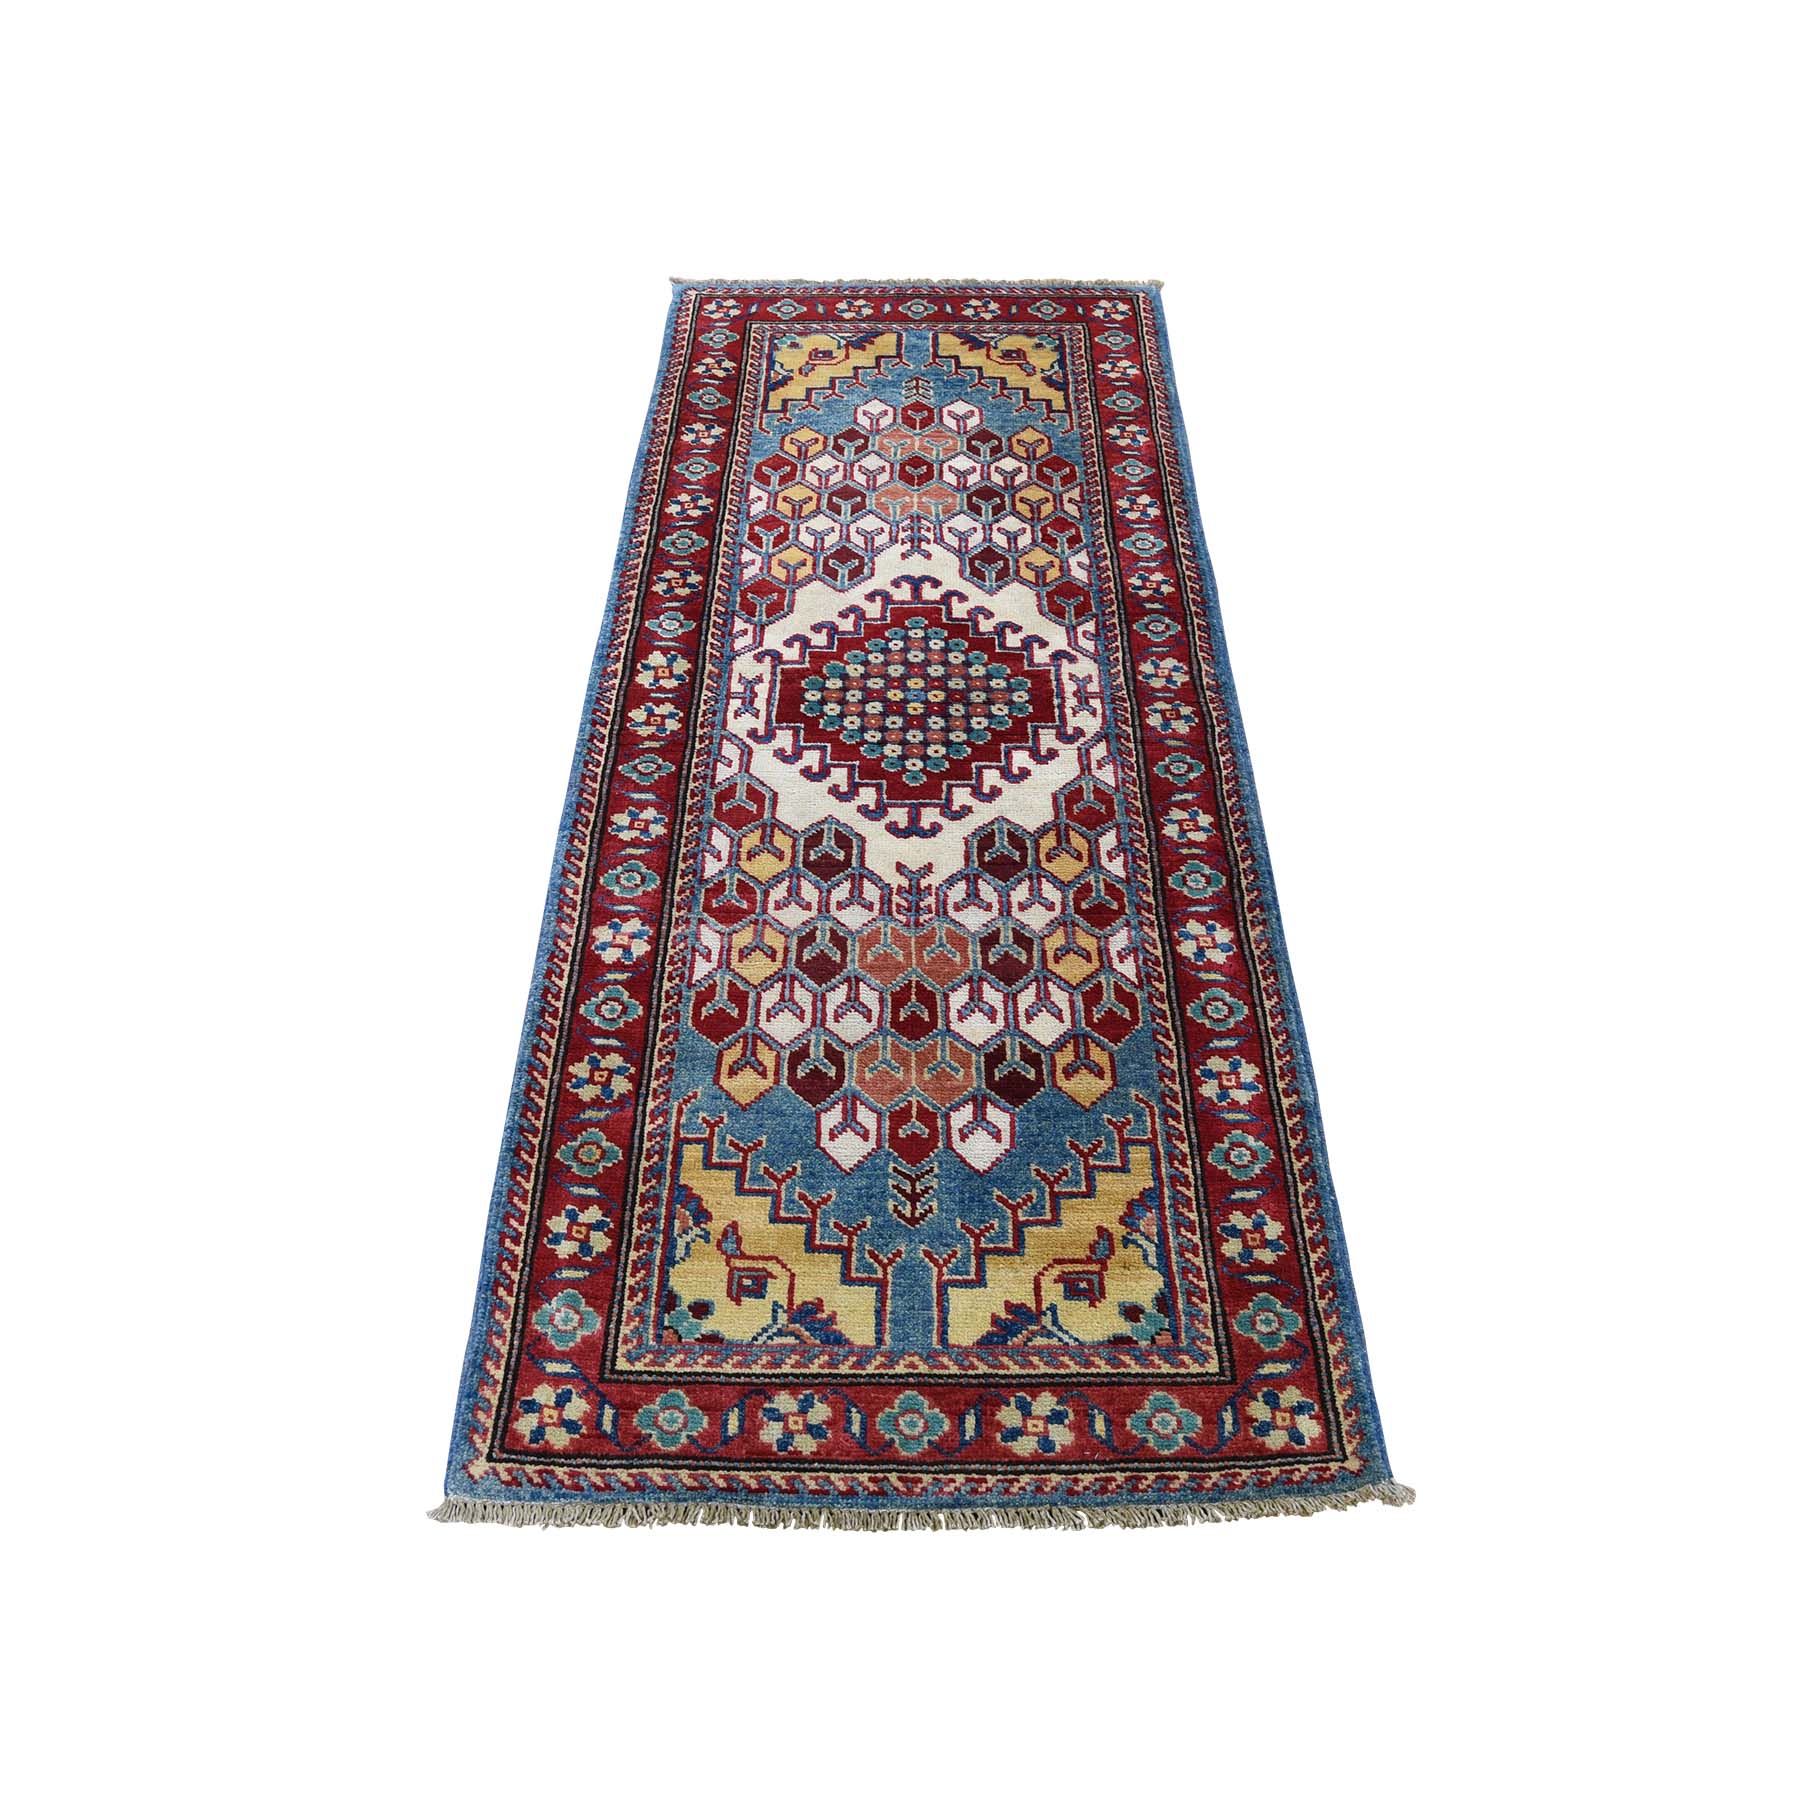 2'8"X5'8" Special Kazak Pure Wool Runner Hand-Knotted Geometric Design Oriental Rug moaddc76